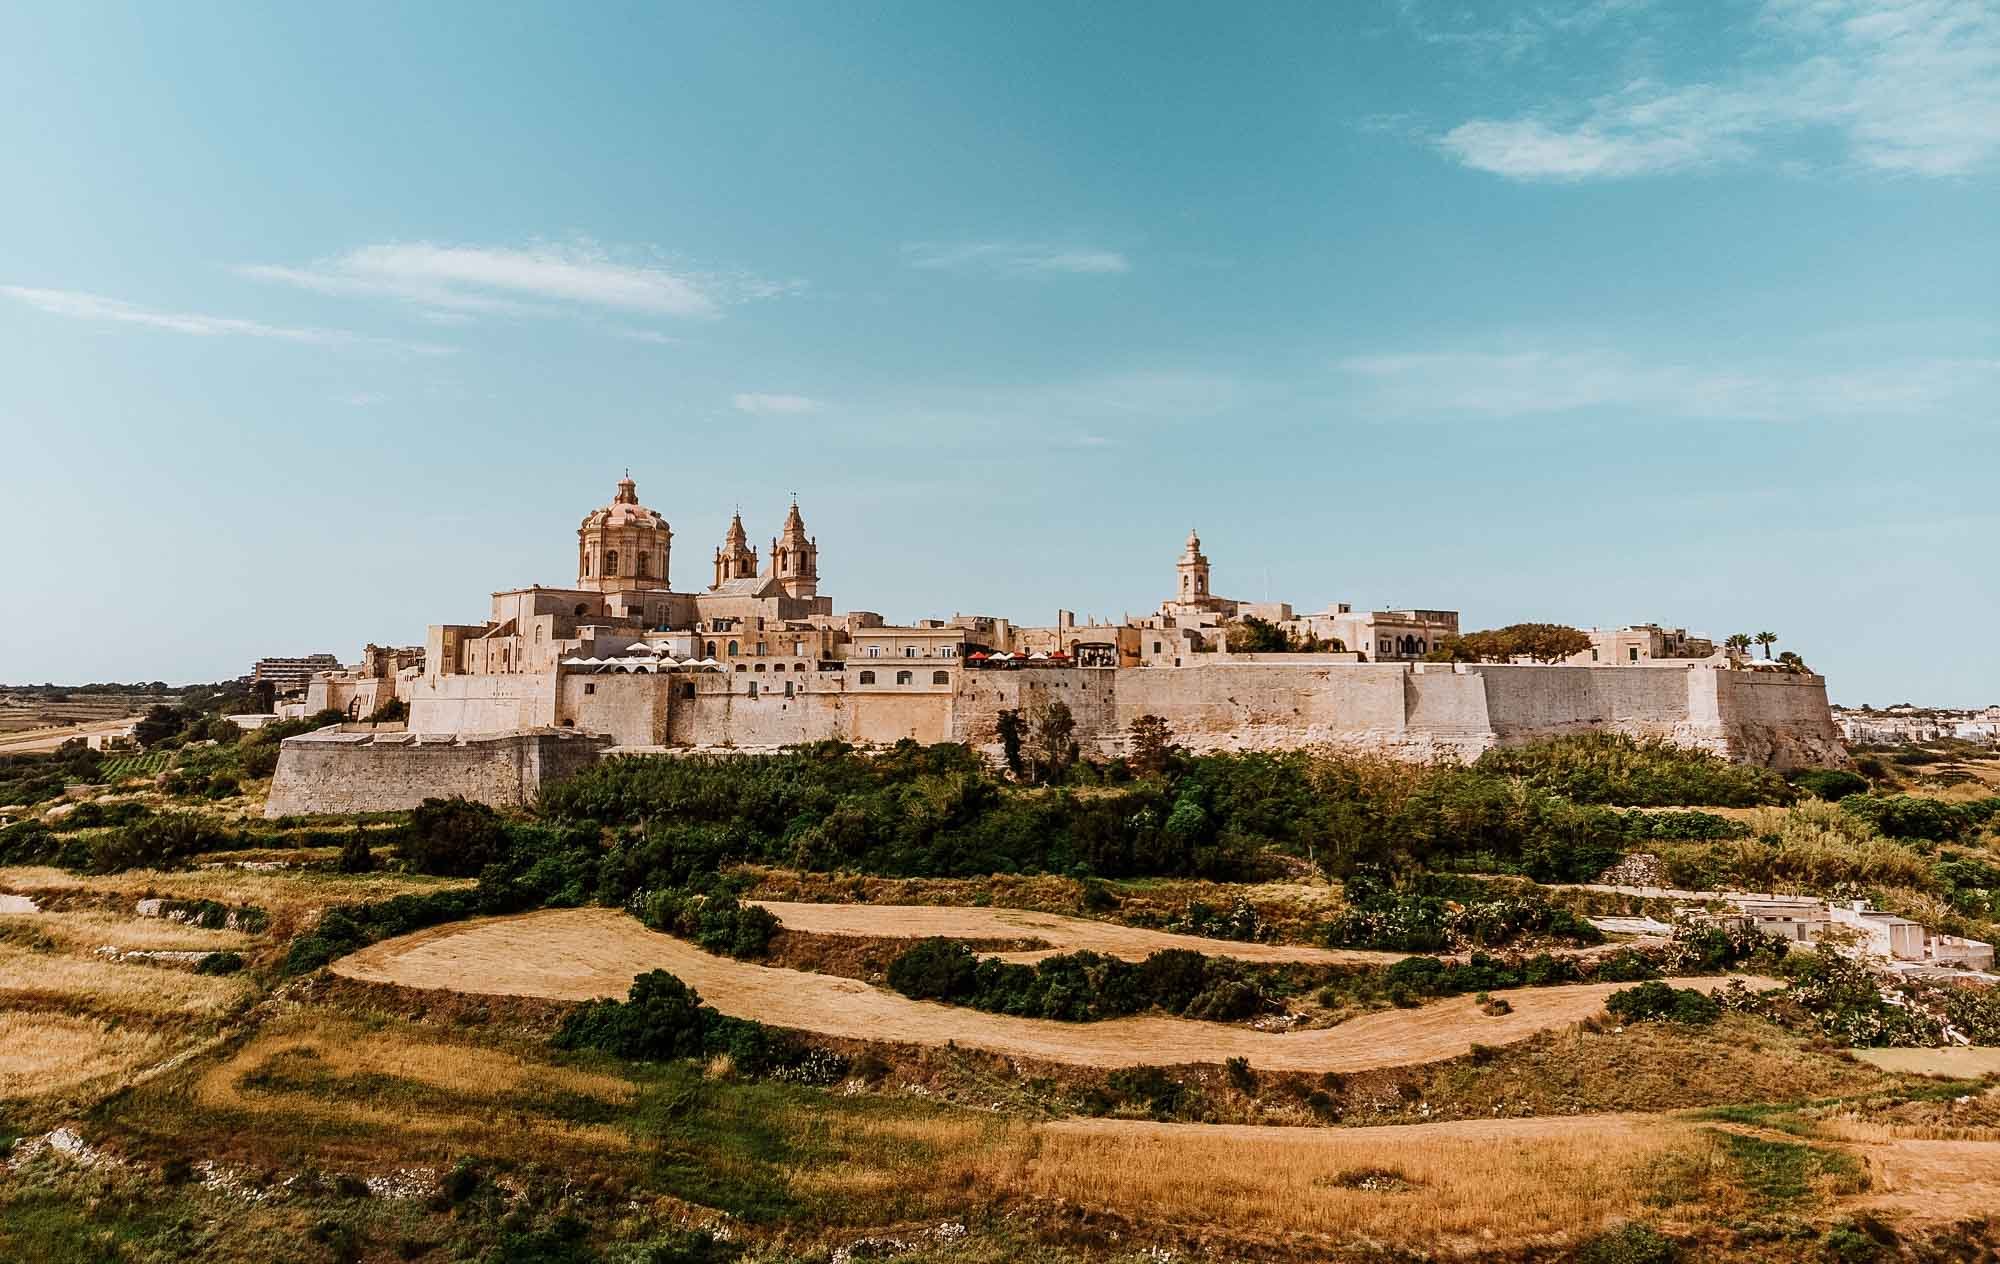 An aerial view of the Mdina from Valletta Mdina via buses to Mdina